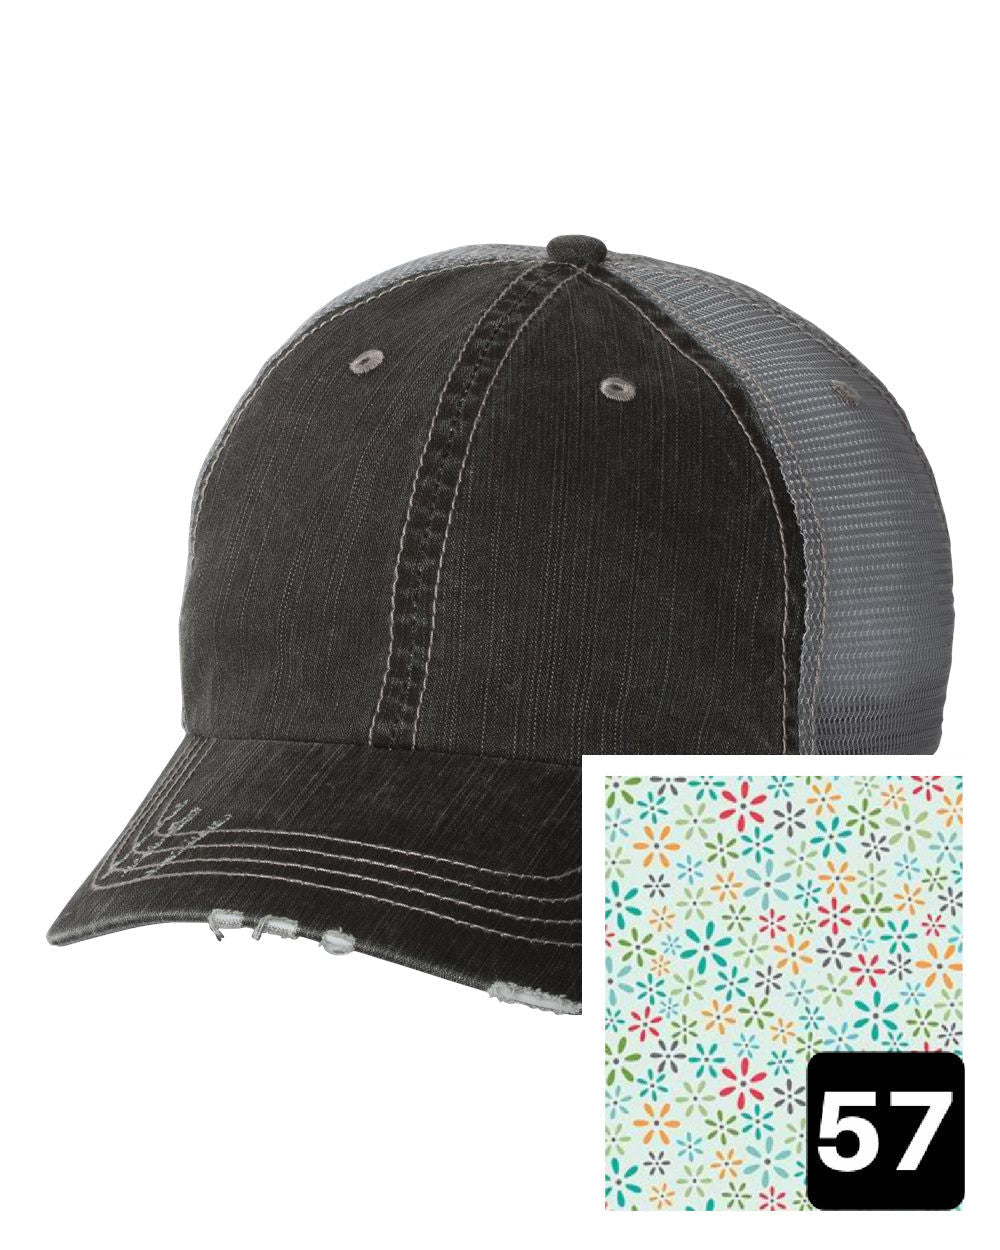 gray distressed trucker hat with white daisy on yellow fabric state of South Dakota